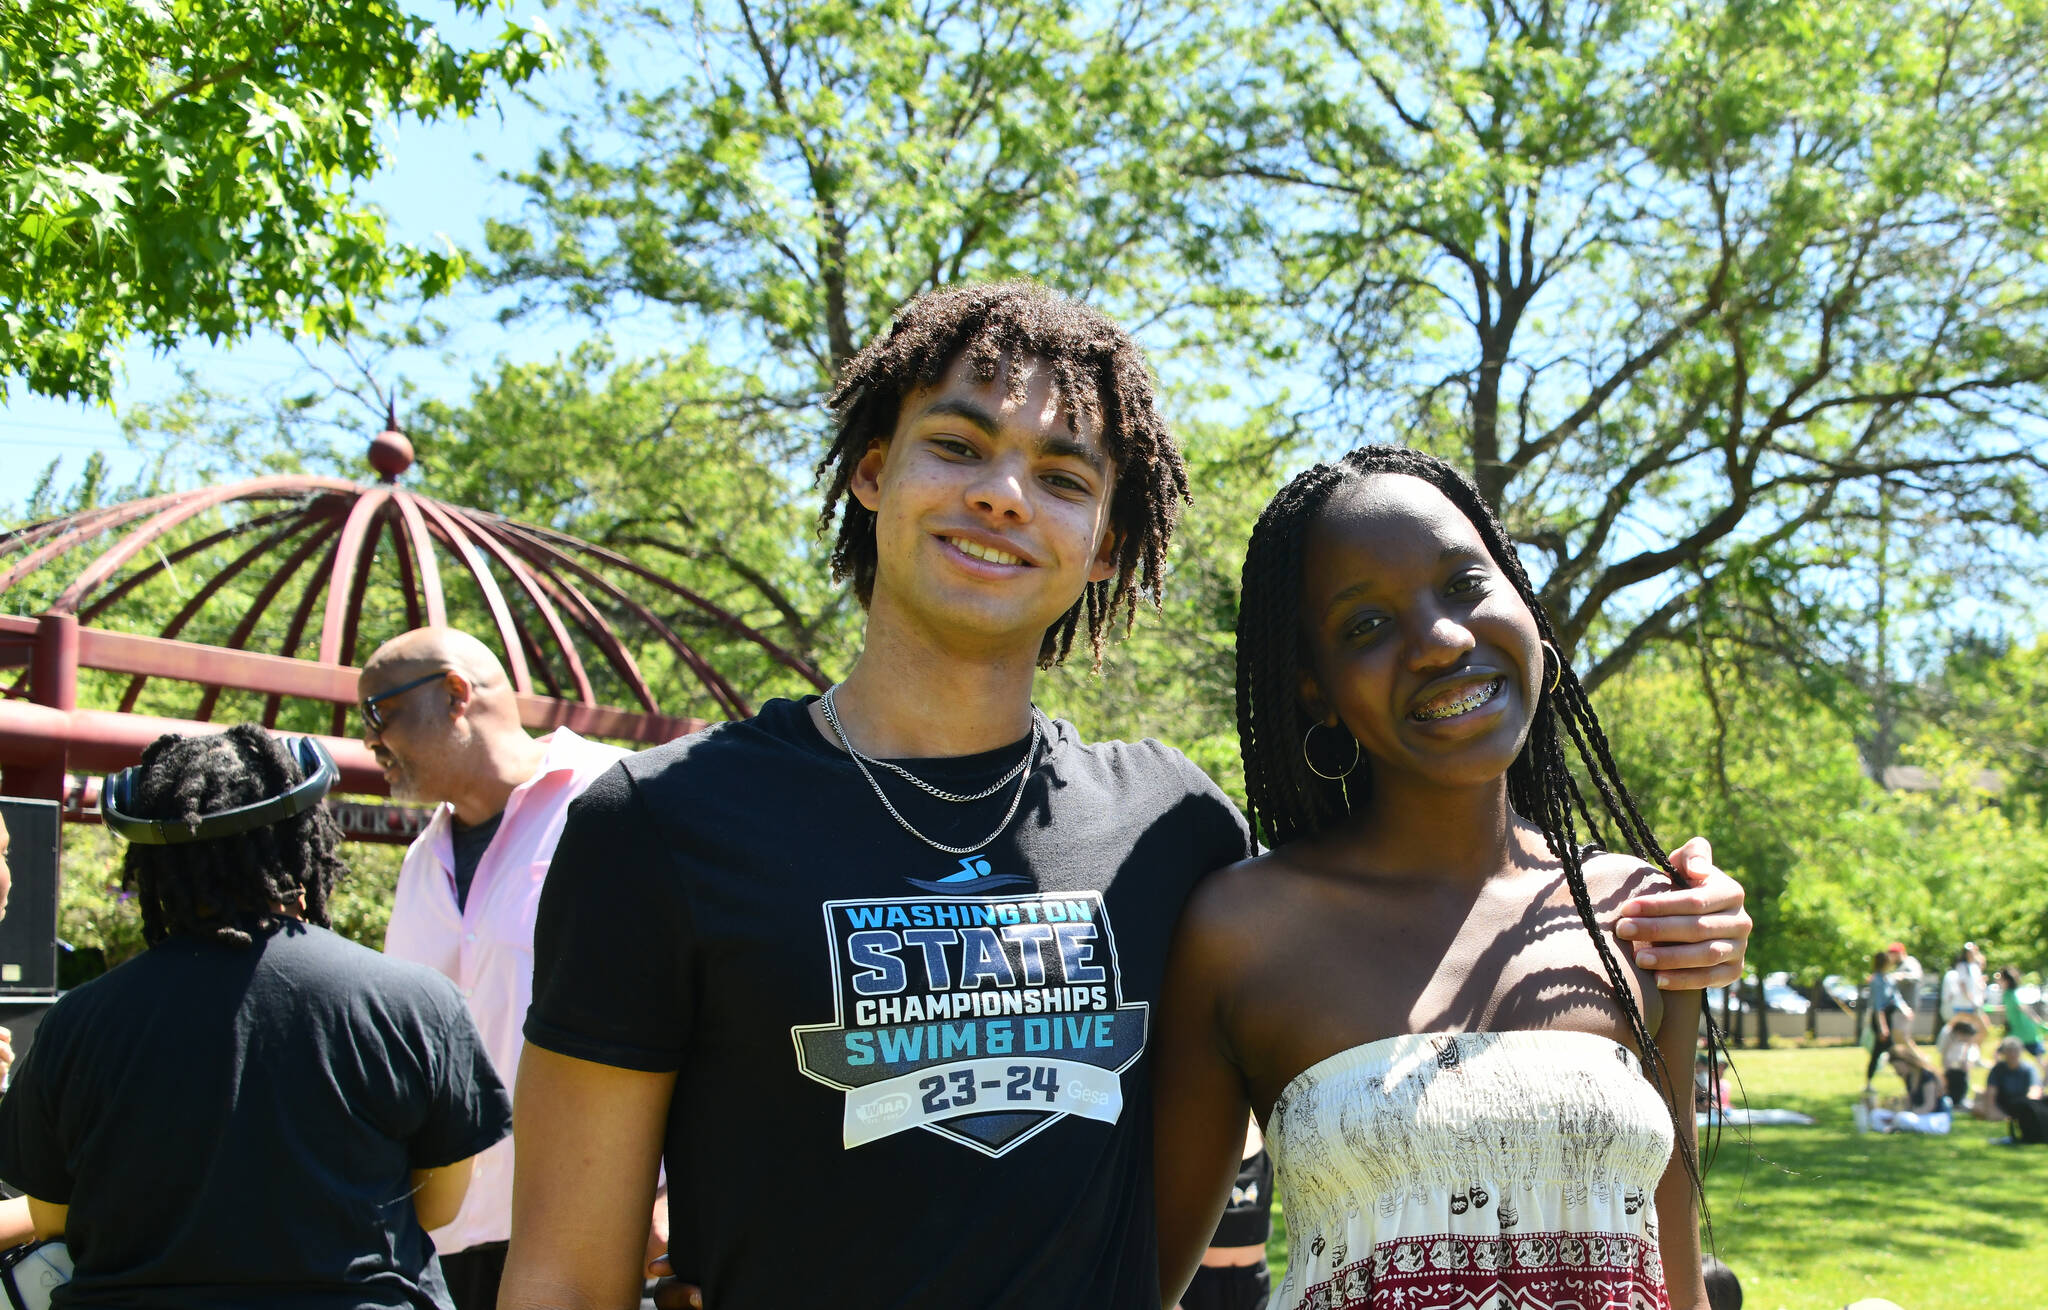 Mercer Island High School (MIHS) students Andrew Pollock and Joy Rurangwa are members of the school’s Black Student Union that hosted a successful Juneteenth Community Celebration from noon to 4 p.m. on June 19 at Mercerdale Park. Andy Nystrom/ staff photo